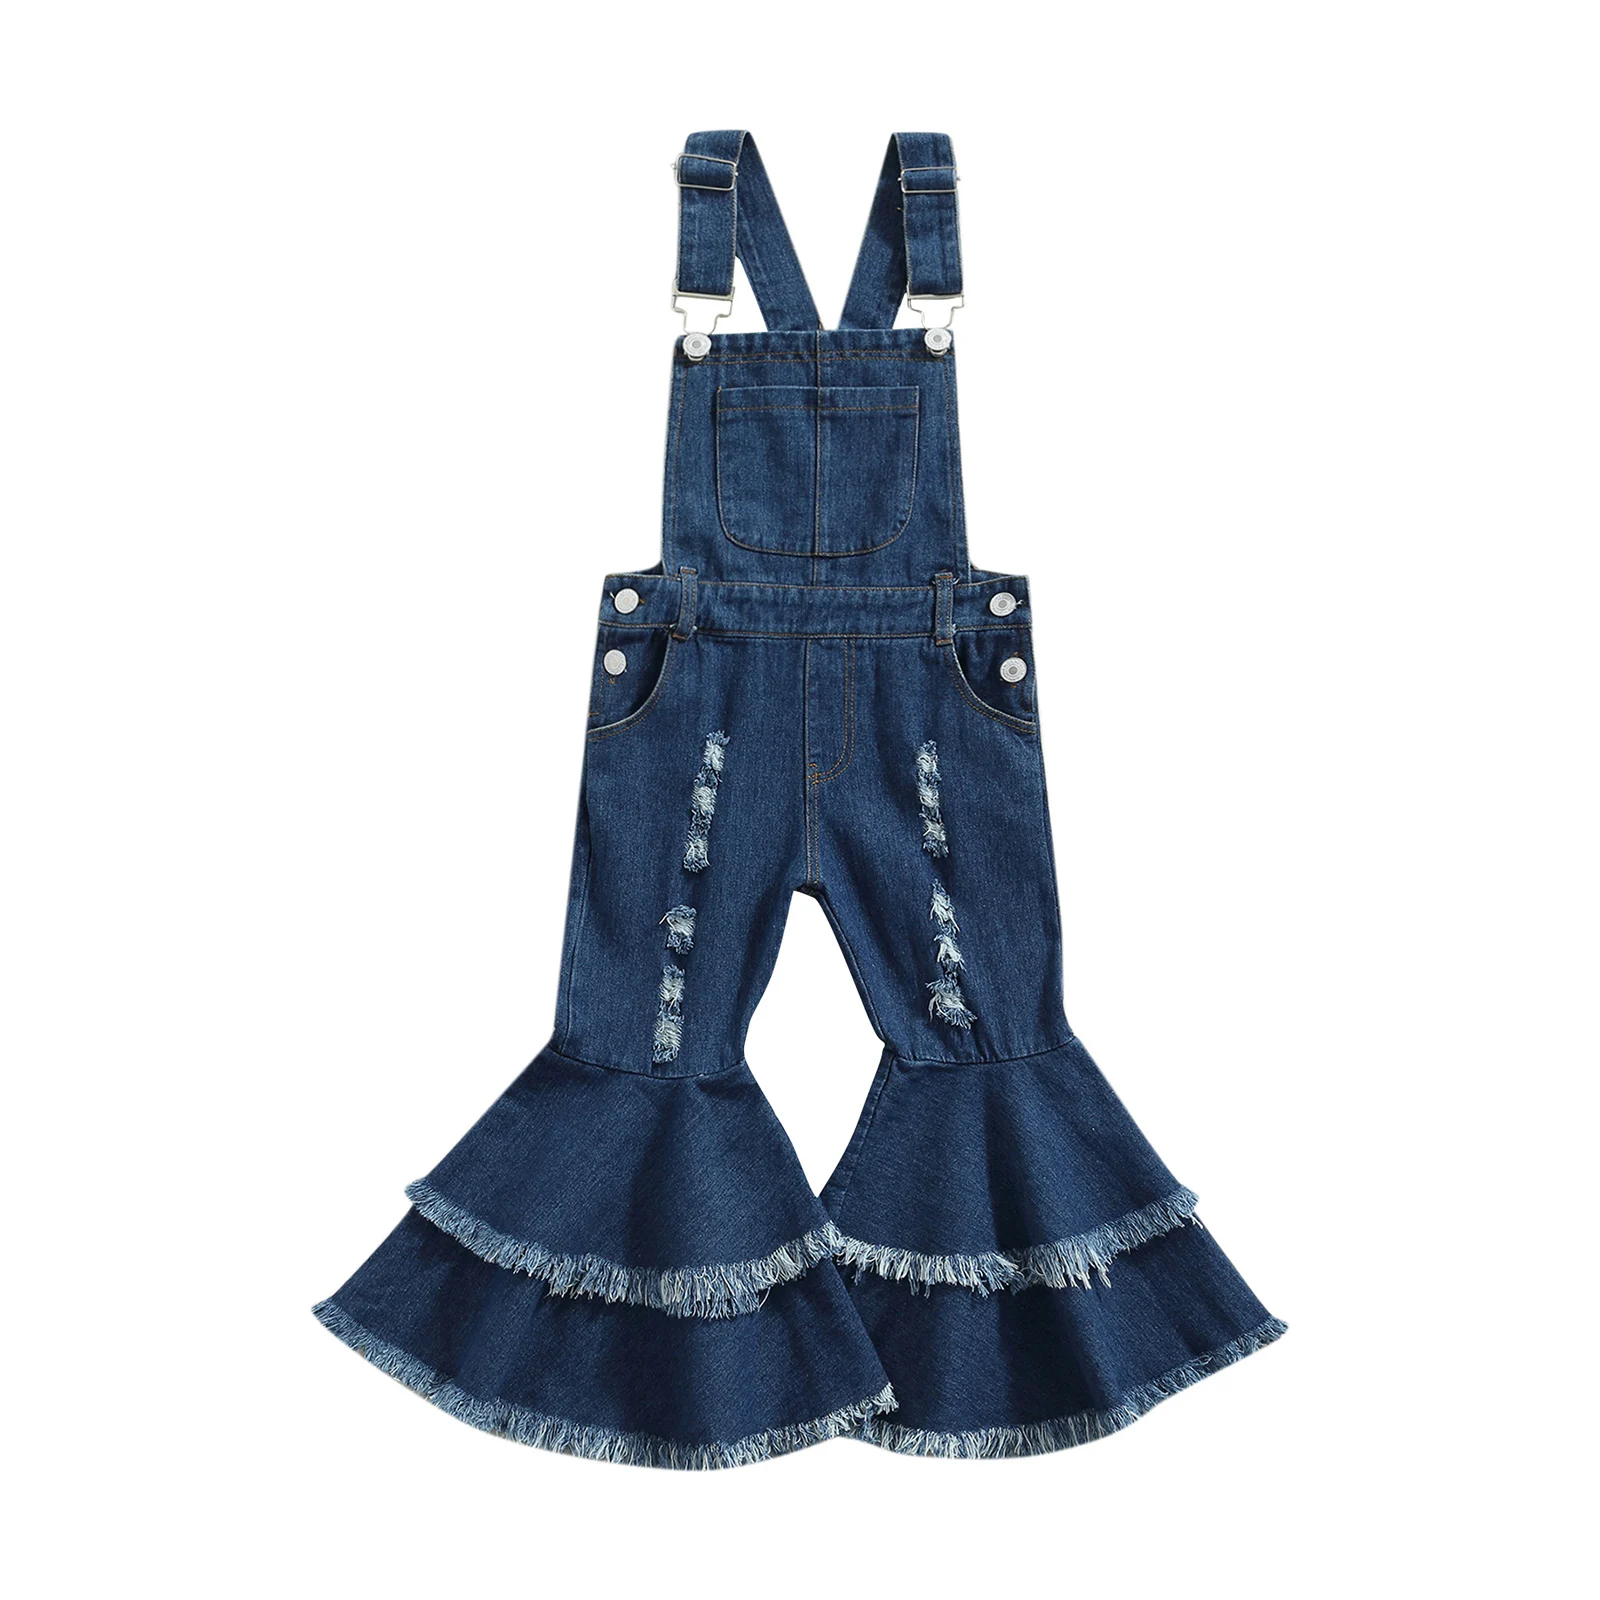 

OPPERIAYA Baby Girls Clothing Pocket Suspender Trousers Blue Solid Color Sleeveless Overalls with Ruffled Hem and Broken Holes